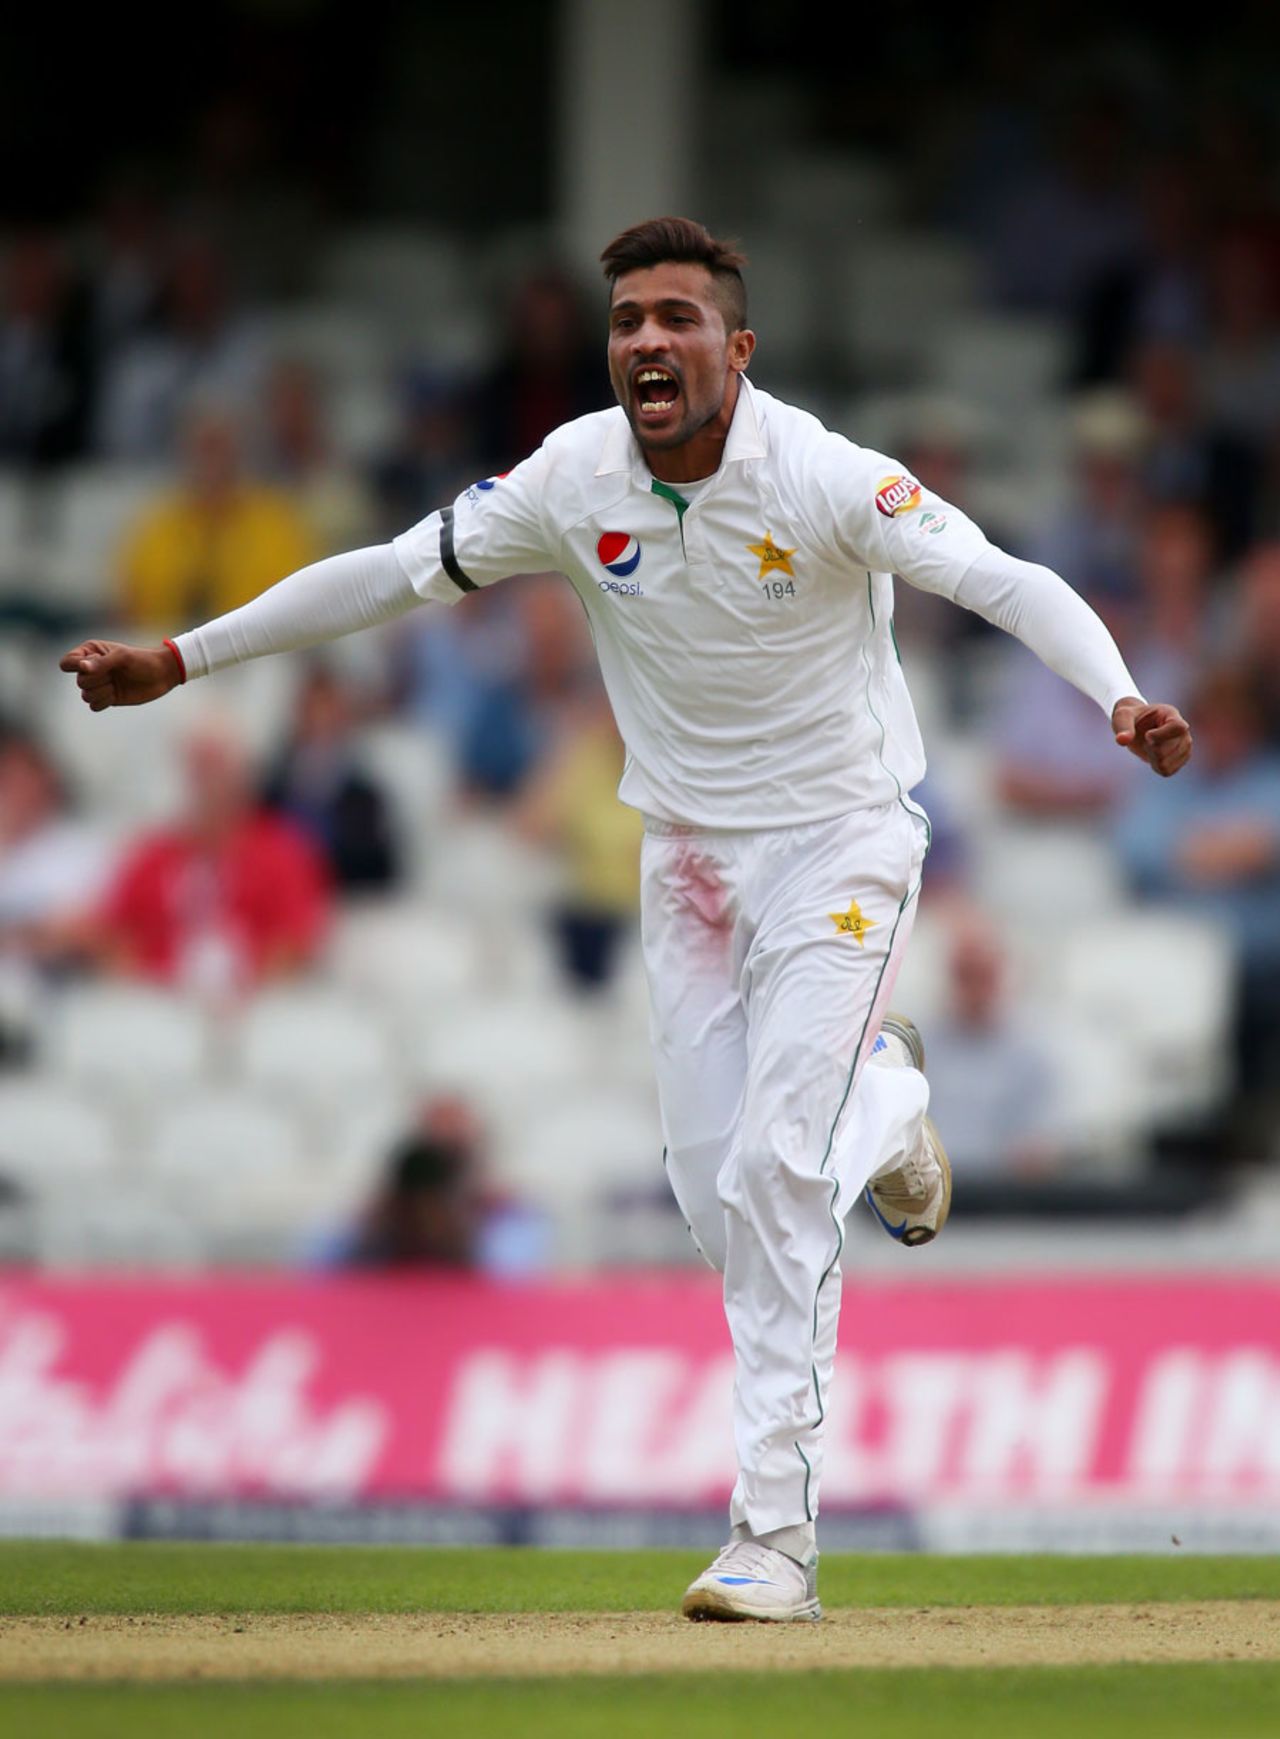 Mohammad Amir celebrates the dismissal of Jonny Bairstow, England v Pakistan, 4th Test, The Oval, 1st day, August 11, 2016